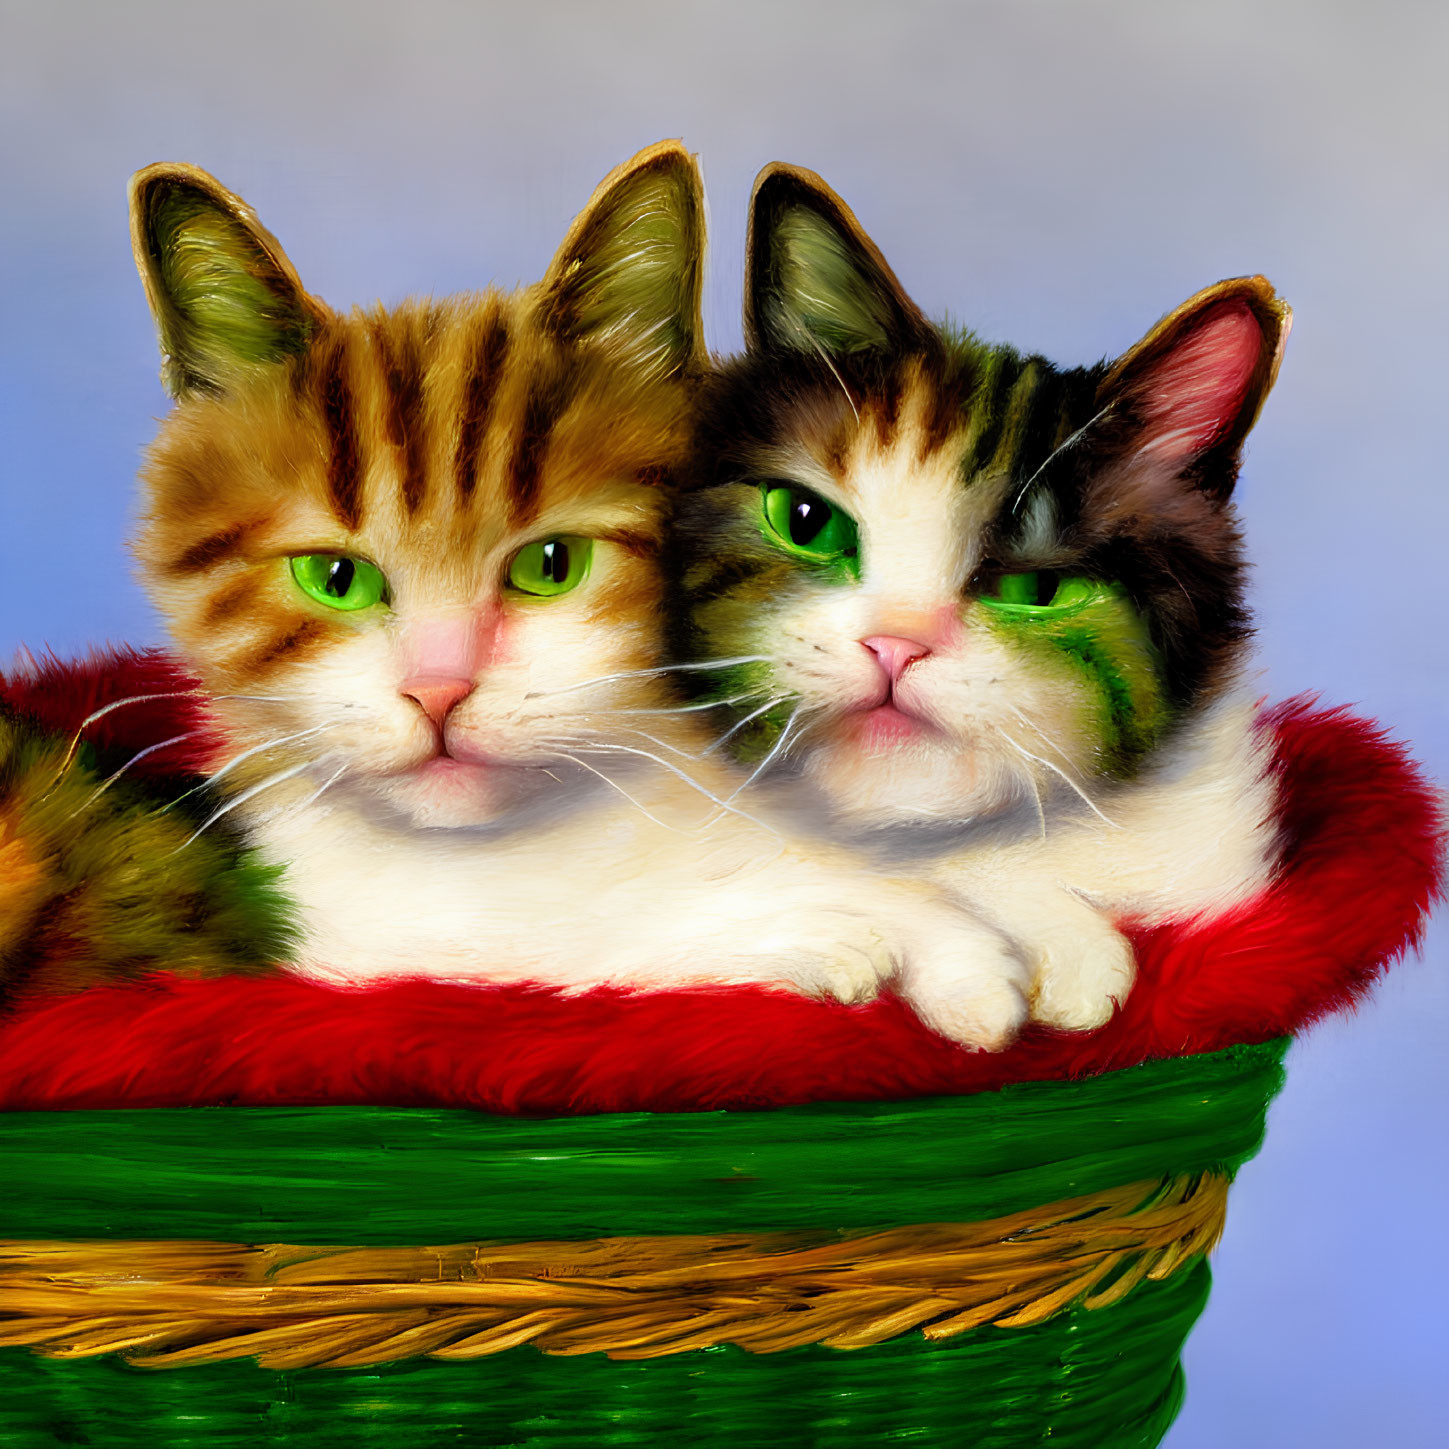 Two Cats with Green Eyes Resting in Basket with Red Lining